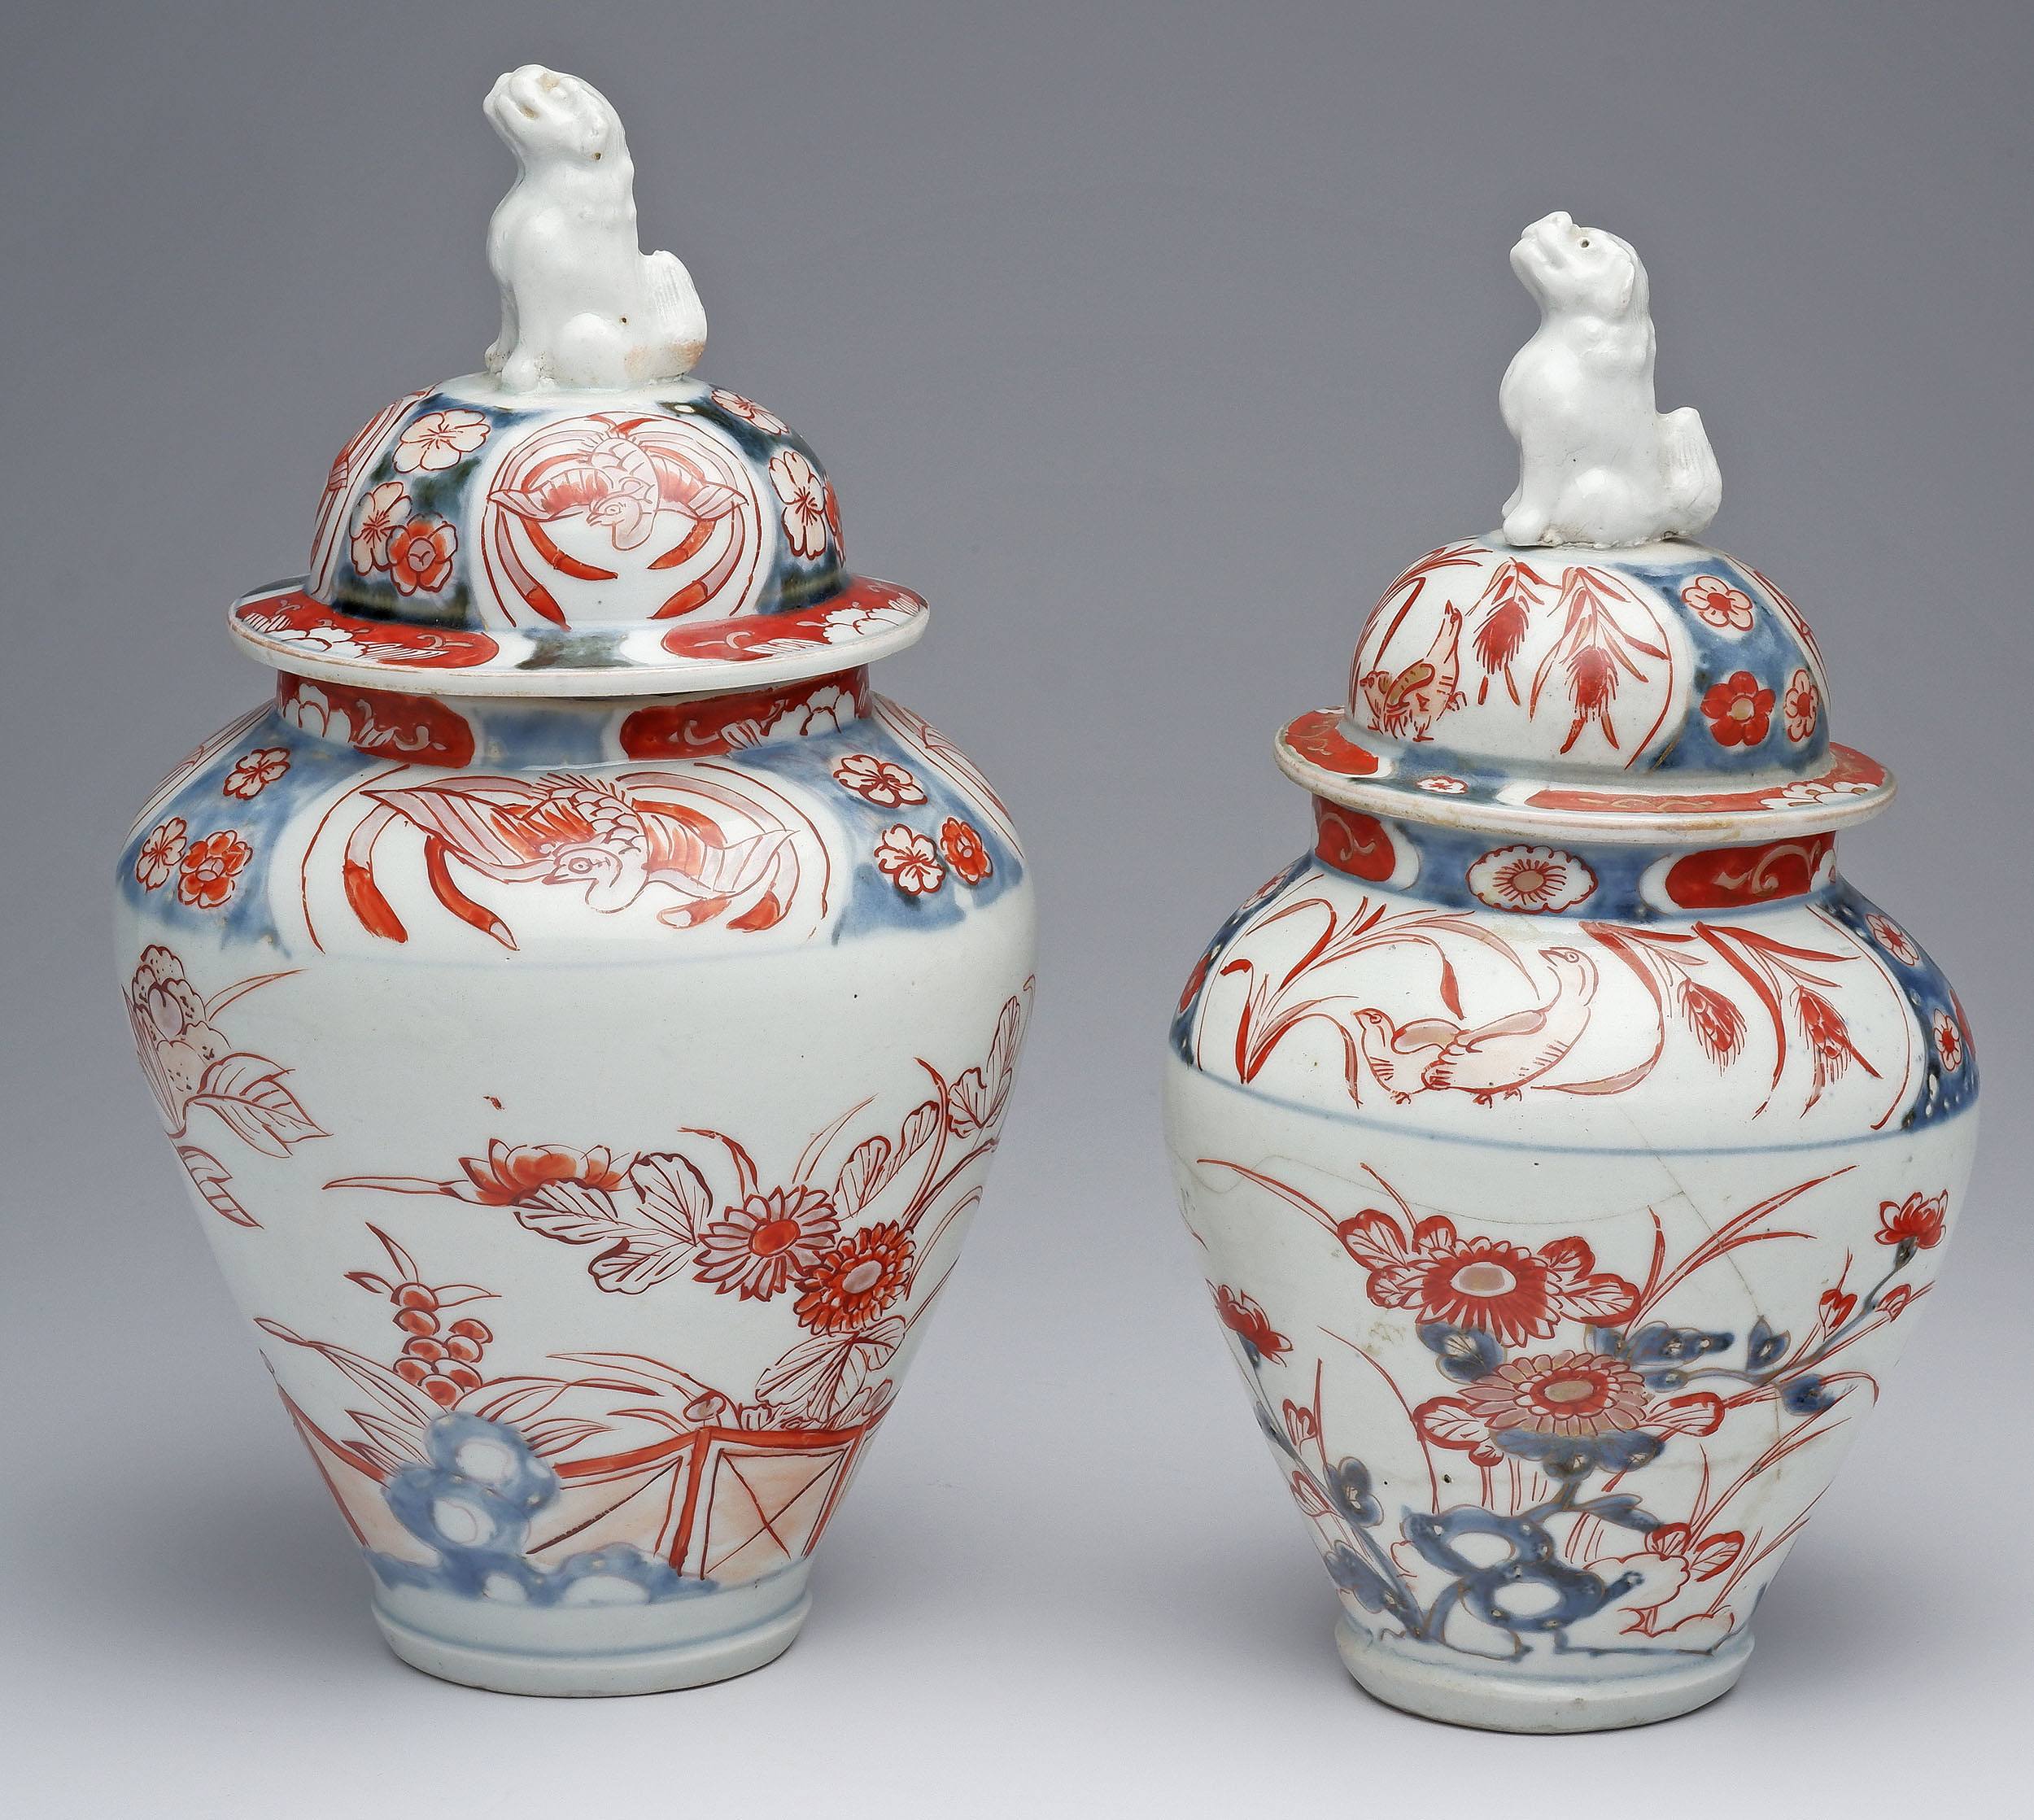 'Near Pair of Early Japanese Imari Vases and Covers Circa 1720'